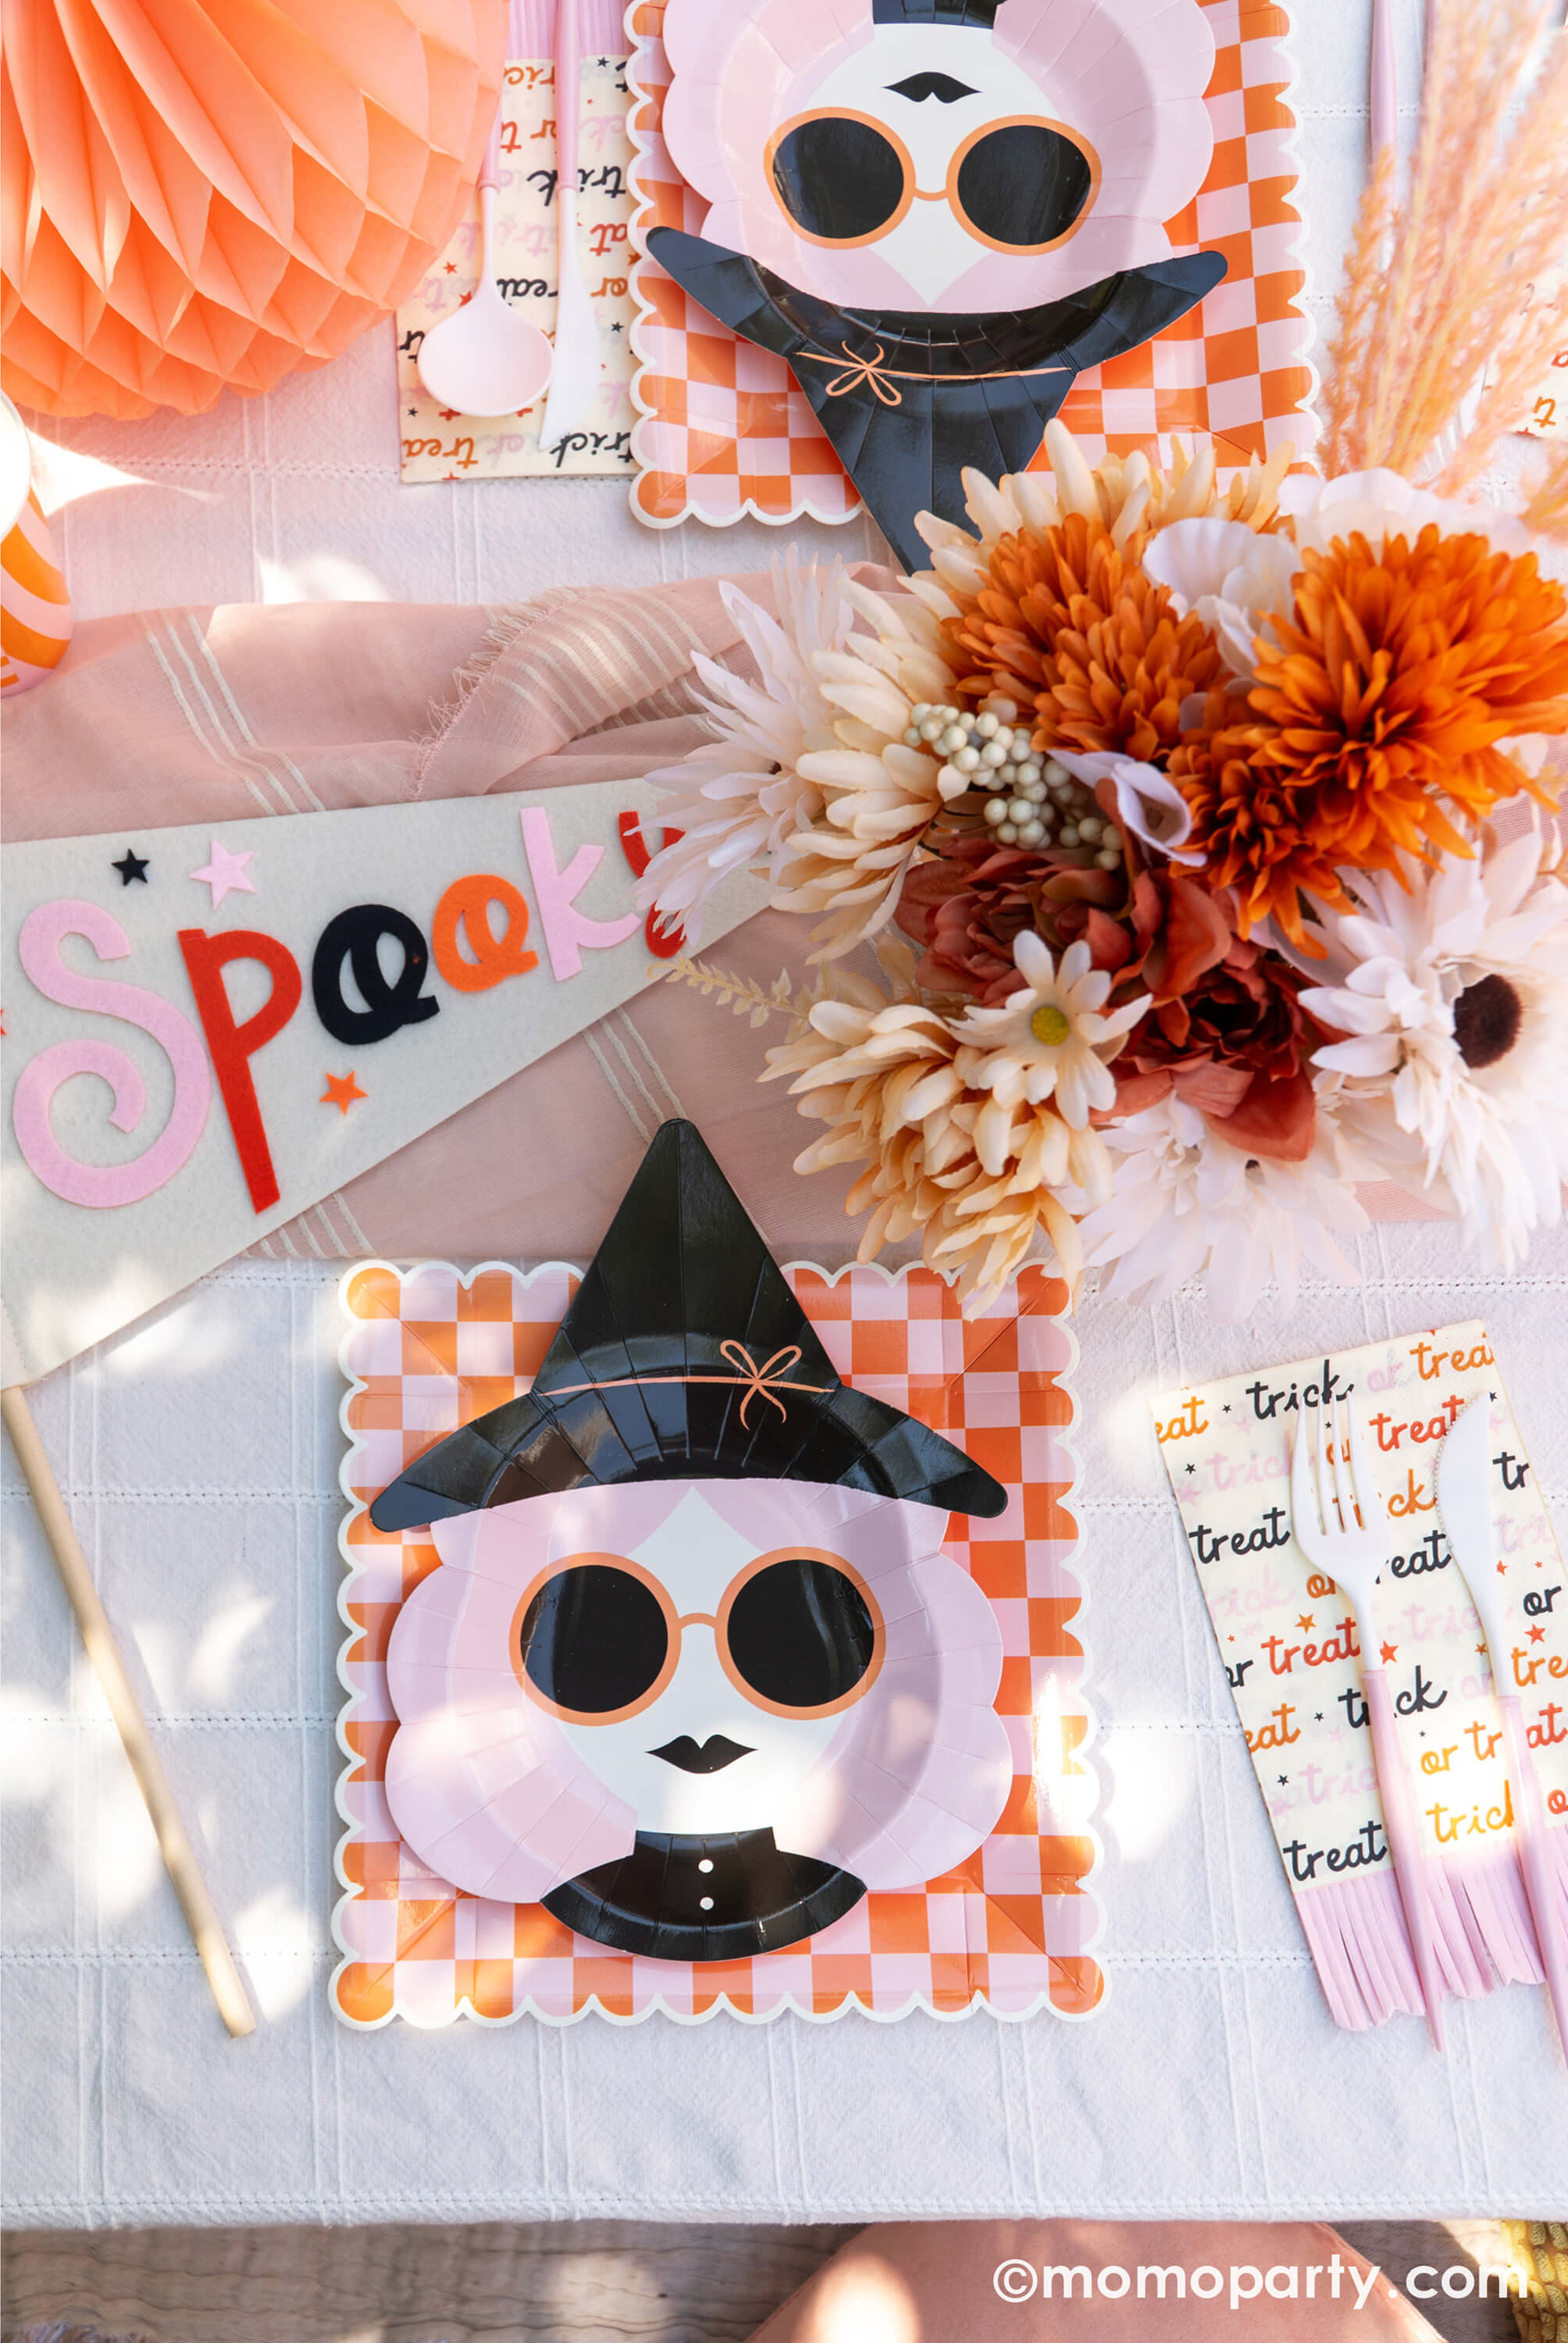 A pink Halloween table featuring Momo Party's pink witch plates paired with orange/pink checkered plates, with boho vibe fall flower arrangement and pastel peach honeycomb pumpkins as the centerpiece, and a felt party pennant that has "spooky" written on, this tablescape gives a great inspiration for a modern and chic Halloween party table decoration ideas.